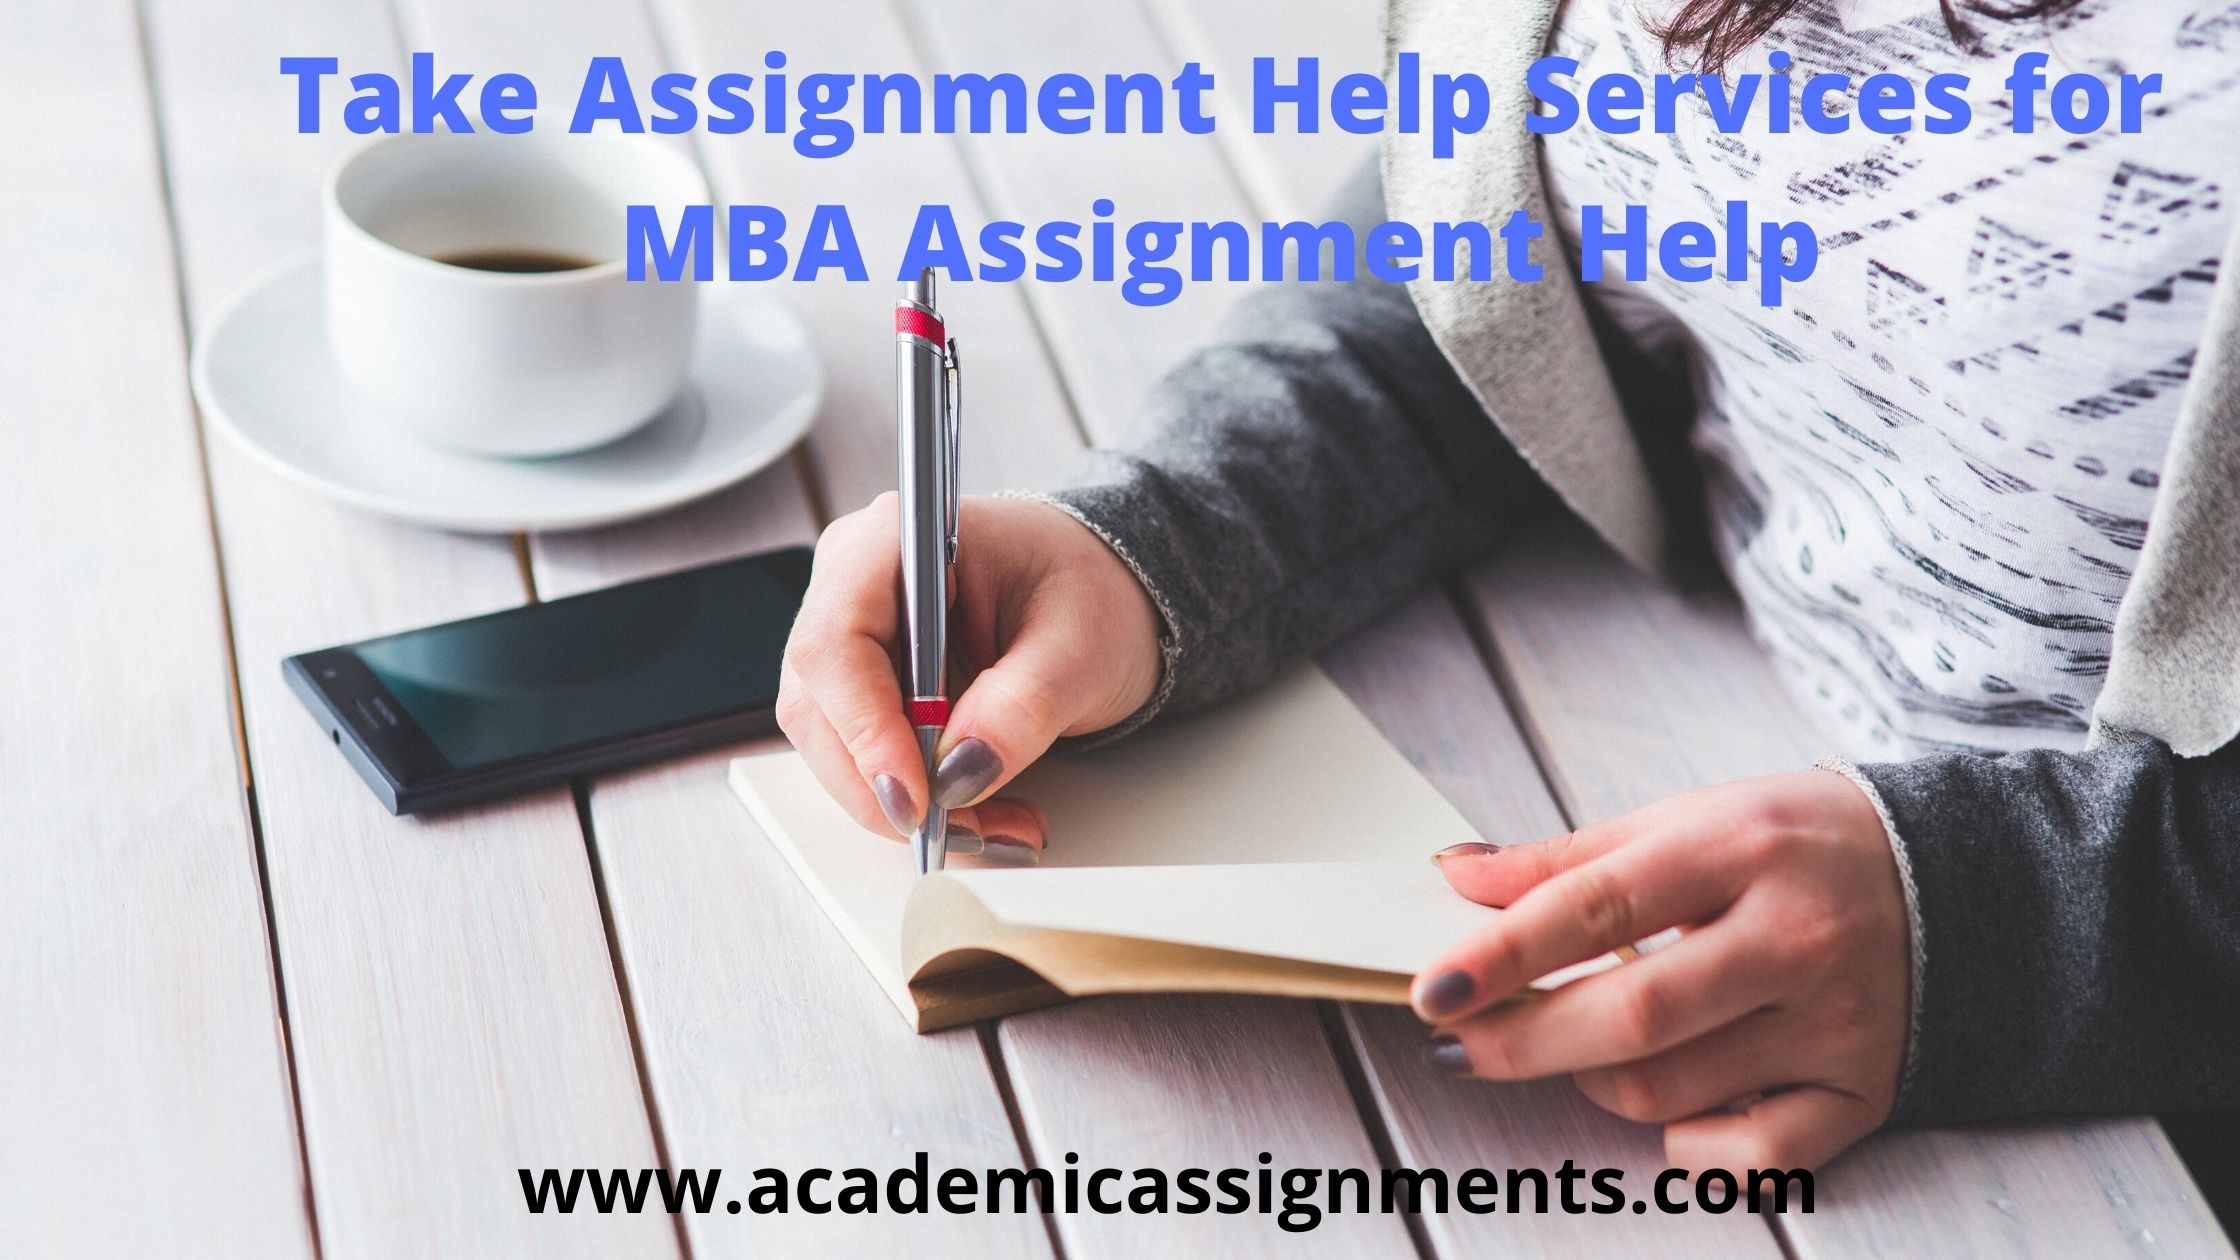 Take Assignment Help Services for MBA Assignment Help